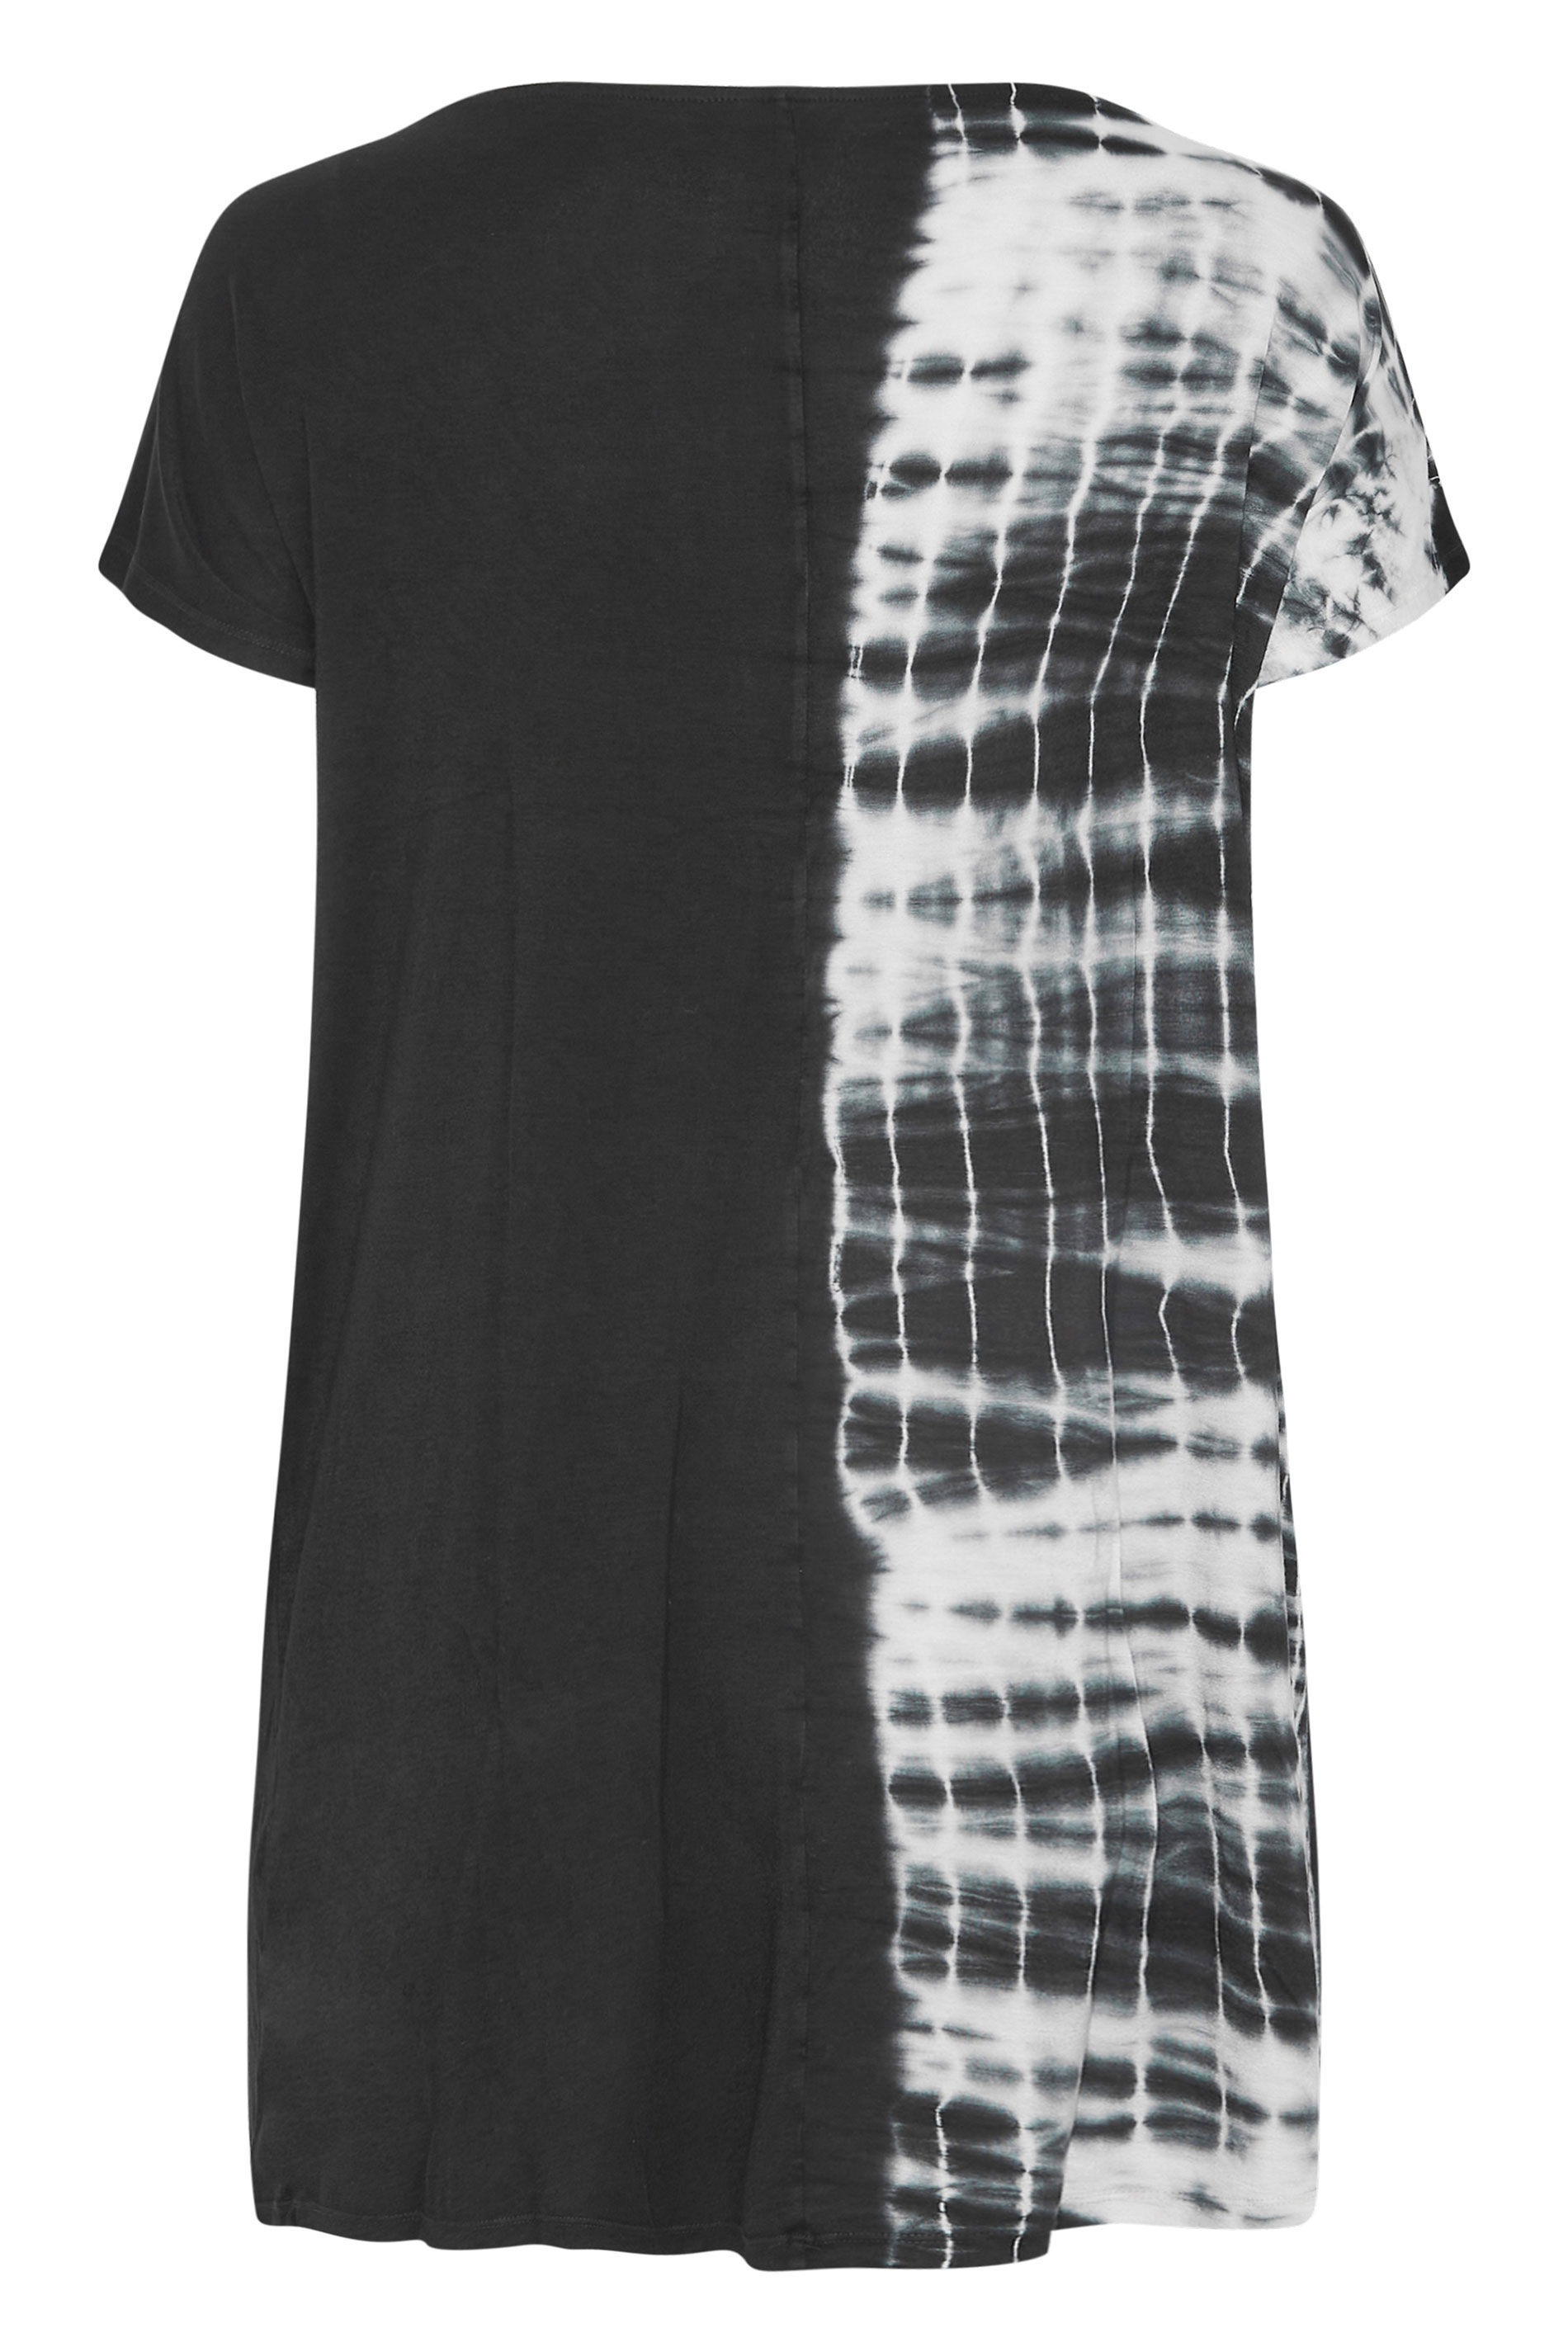 Grande taille  Tops Grande taille  T-Shirts | T-Shirt Noir Tie & Dye Manches Courtes - ZO85975